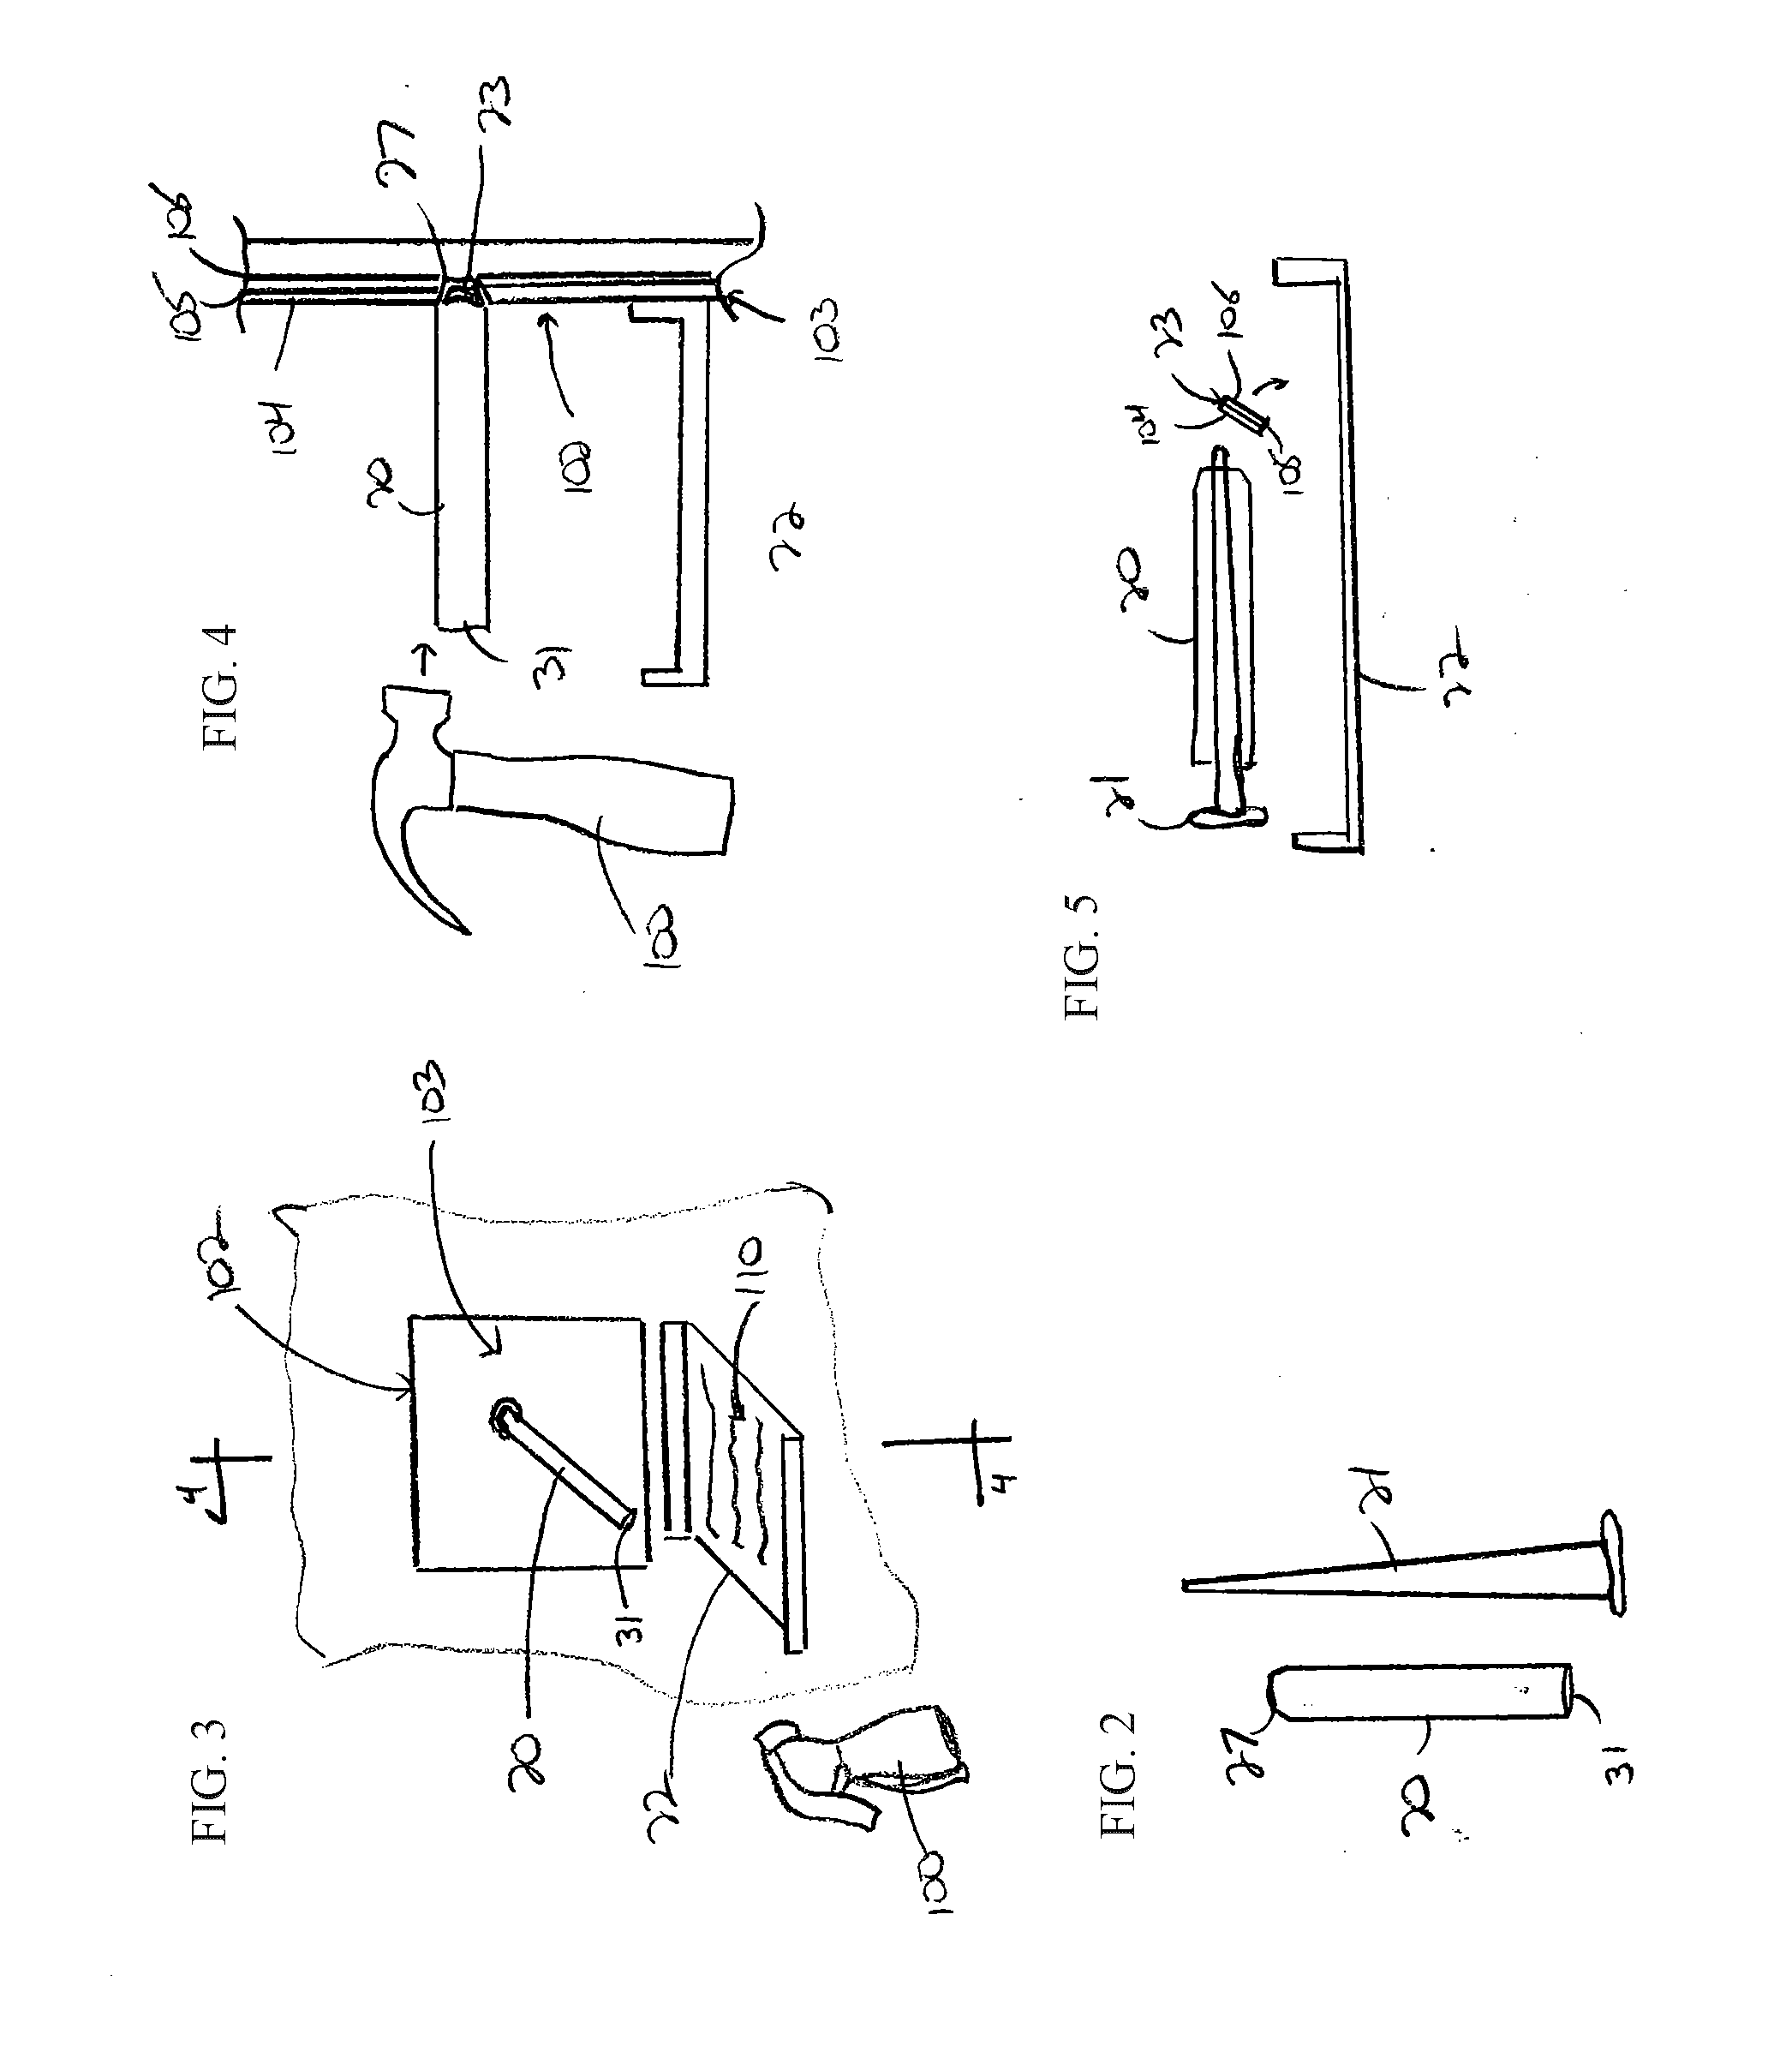 Testing Method and Kit for Detecting Lead, Mercury, and Chromate in Paint , Varnish, and Other surface Coatings